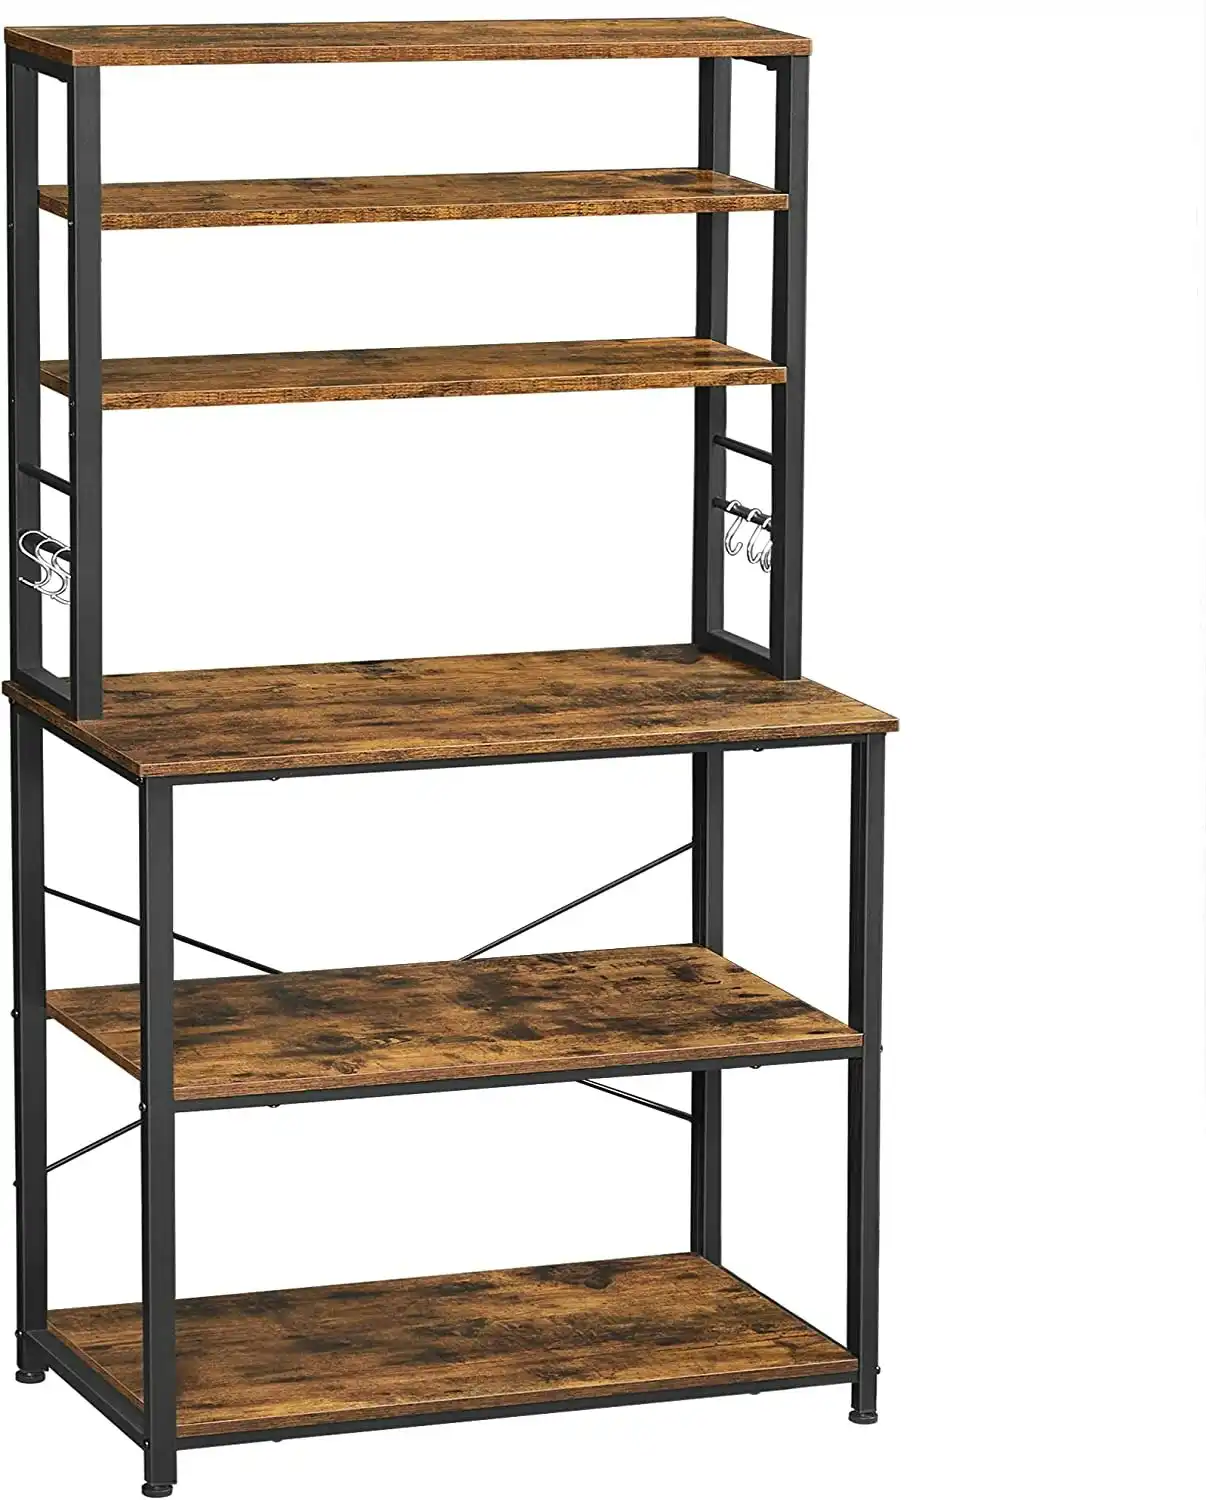 Rustic Brown and Black 6-Tier Kitchen Utility Storage Shelf - Baker's Rack with Microwave Oven Stand and 6 Hooks.